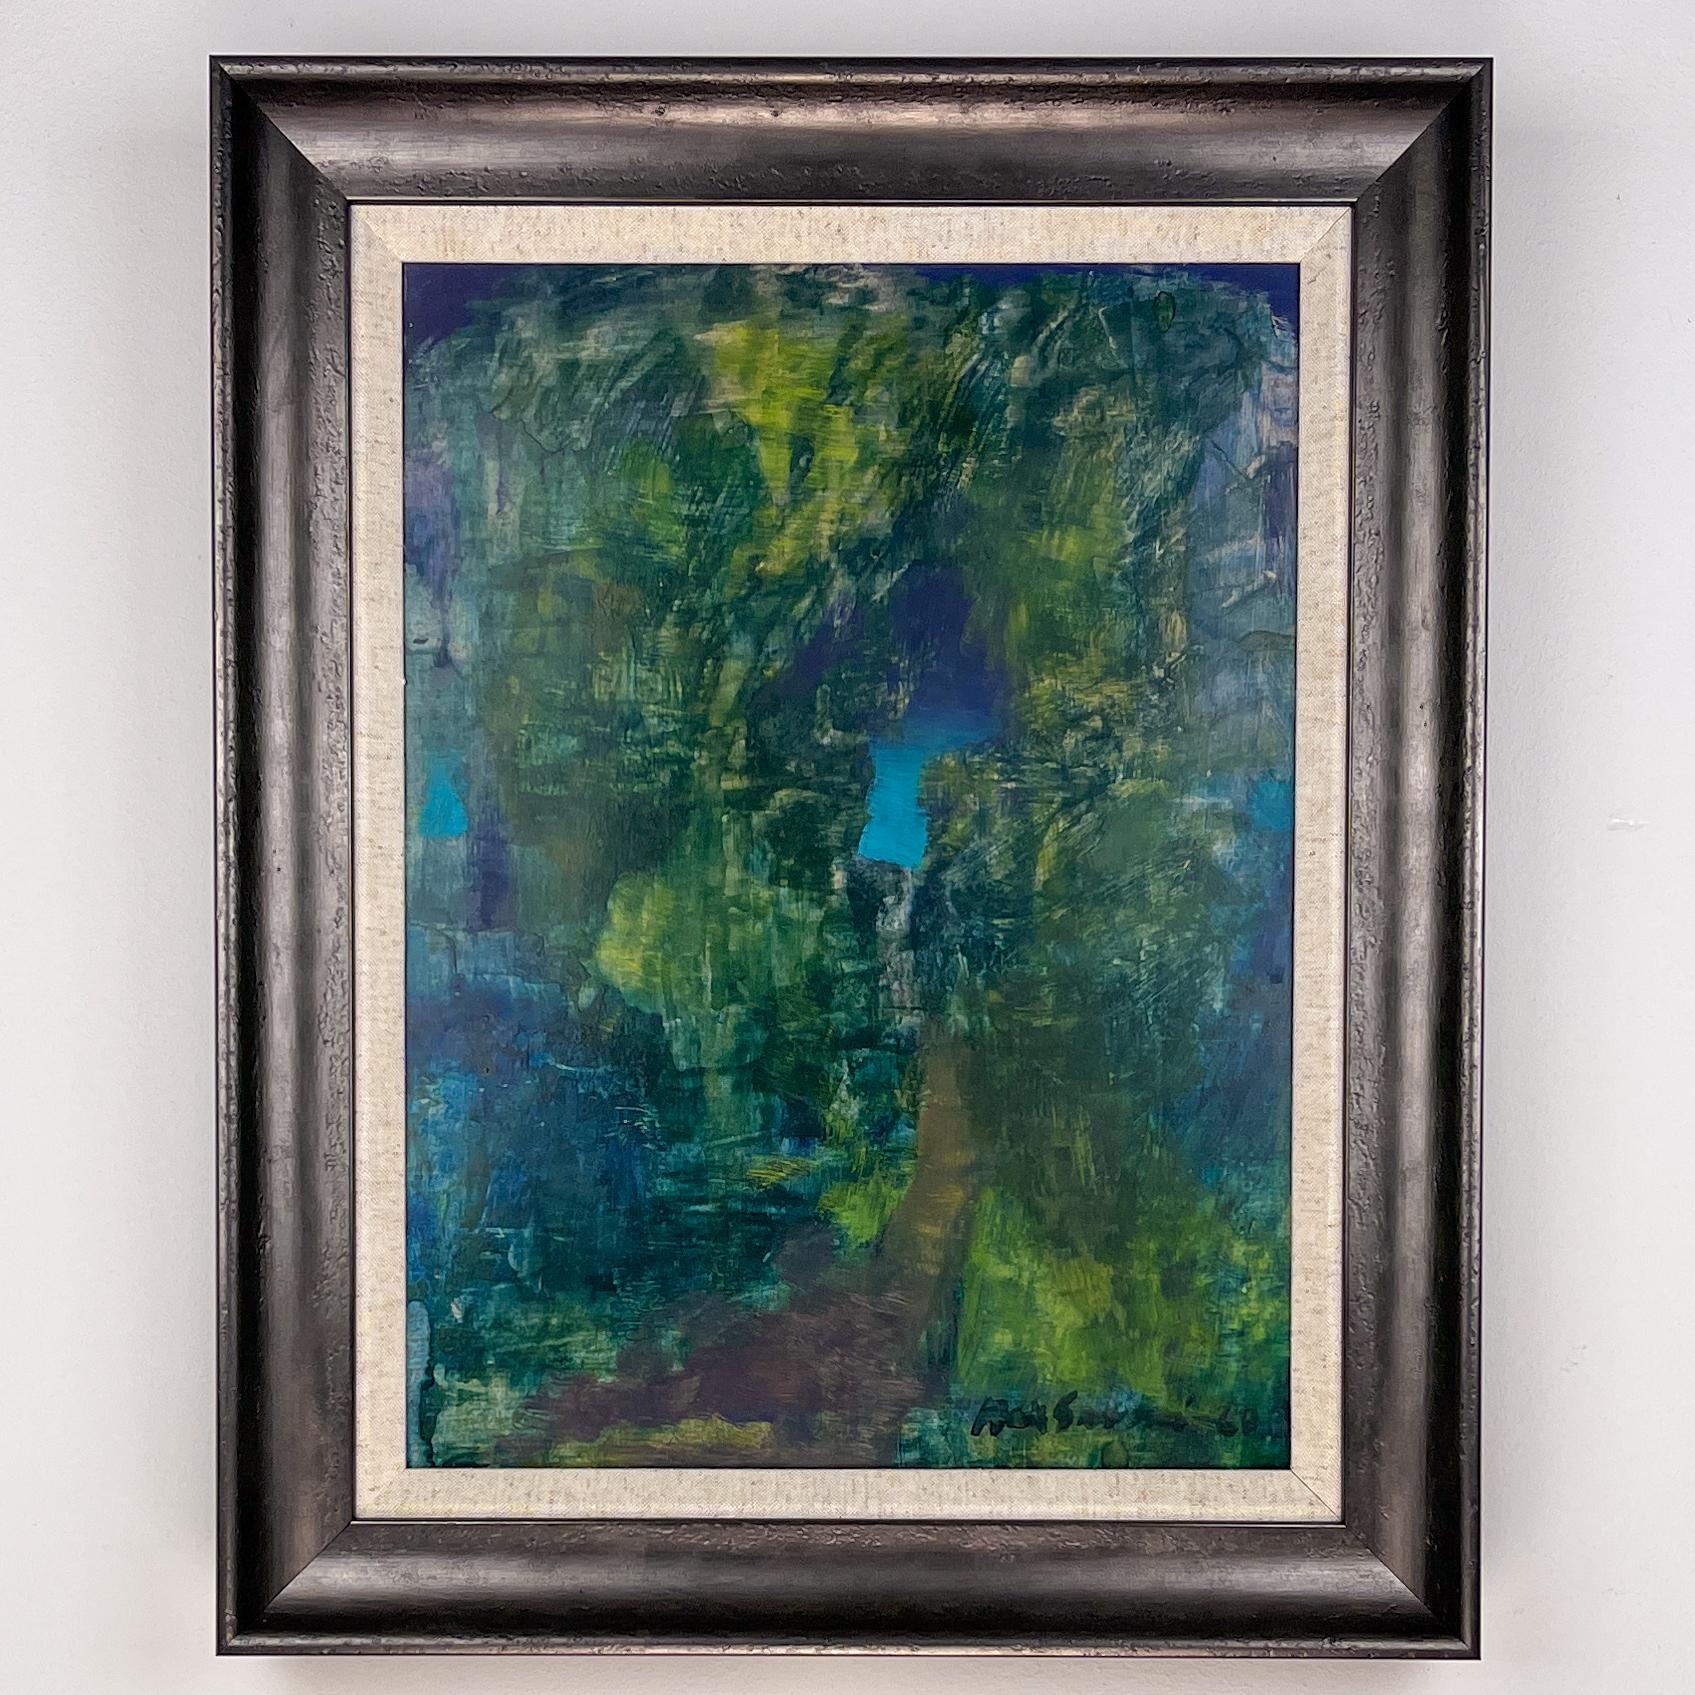 Original artwork by Finnish painter Max Salmi. 

In this abstracted landscape a meandering road is depicted disappearing in a forest. It is painted with dynamic brushstrokes in a beautiful palet of greens and blues. 

The artist signed the work